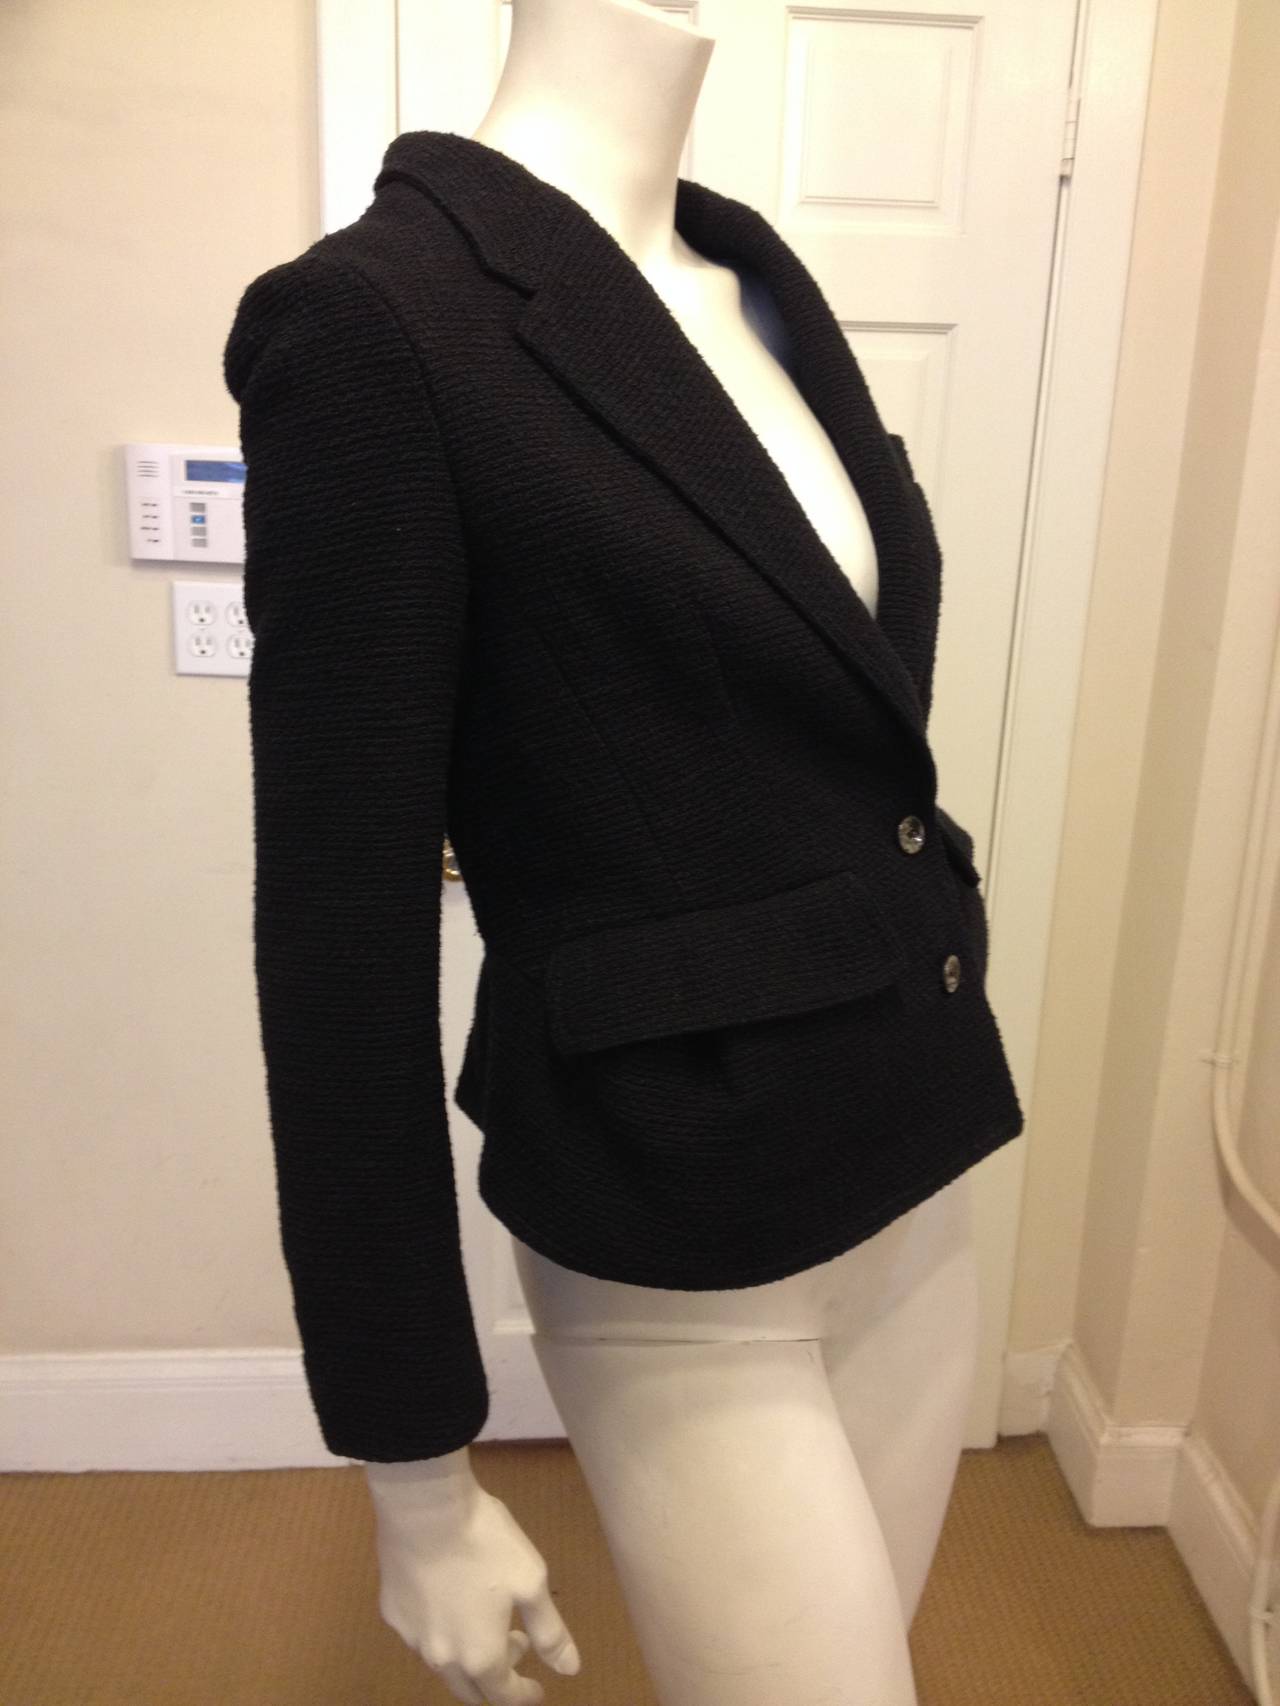 The perfect black blazer for interviews to dinners out, for special events to meetings - you'll always look chic in this piece. The material is a warm wool/cotton fabric but the cut is sleek and tailored in all the right ways. The neckline dips into